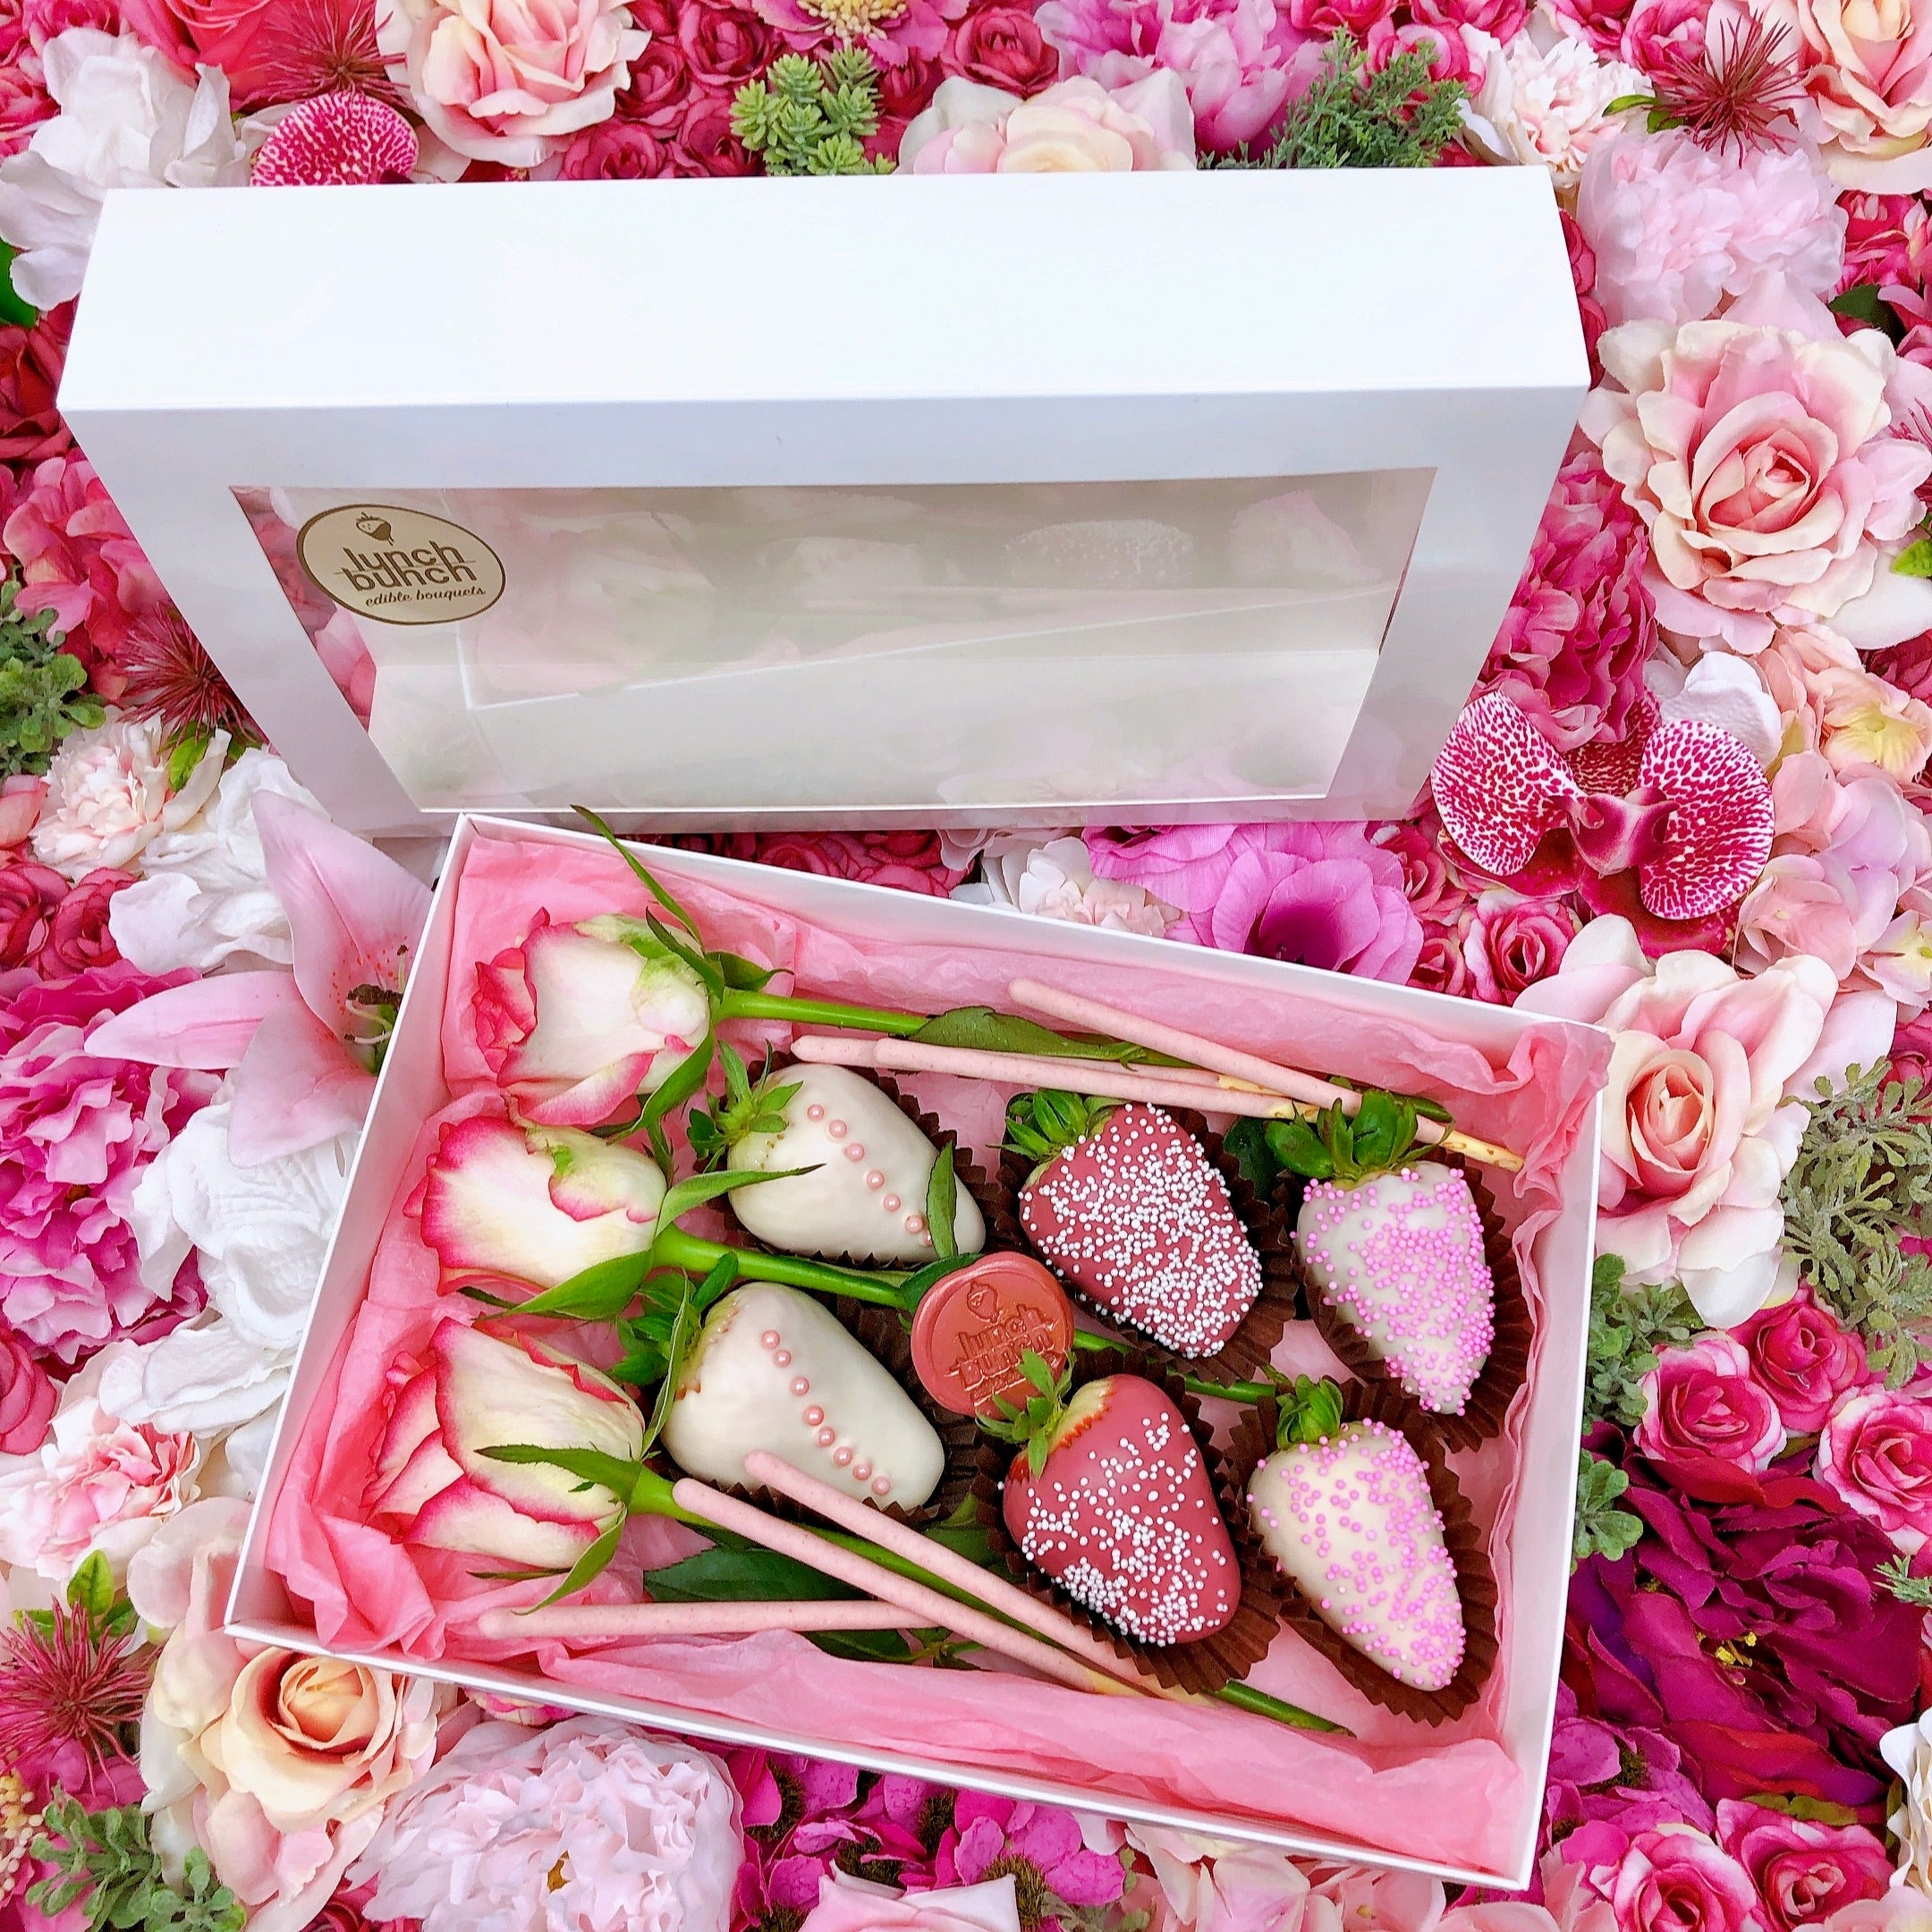 Small gift box with chocolate covered strawberries and roses perfect for him and for her